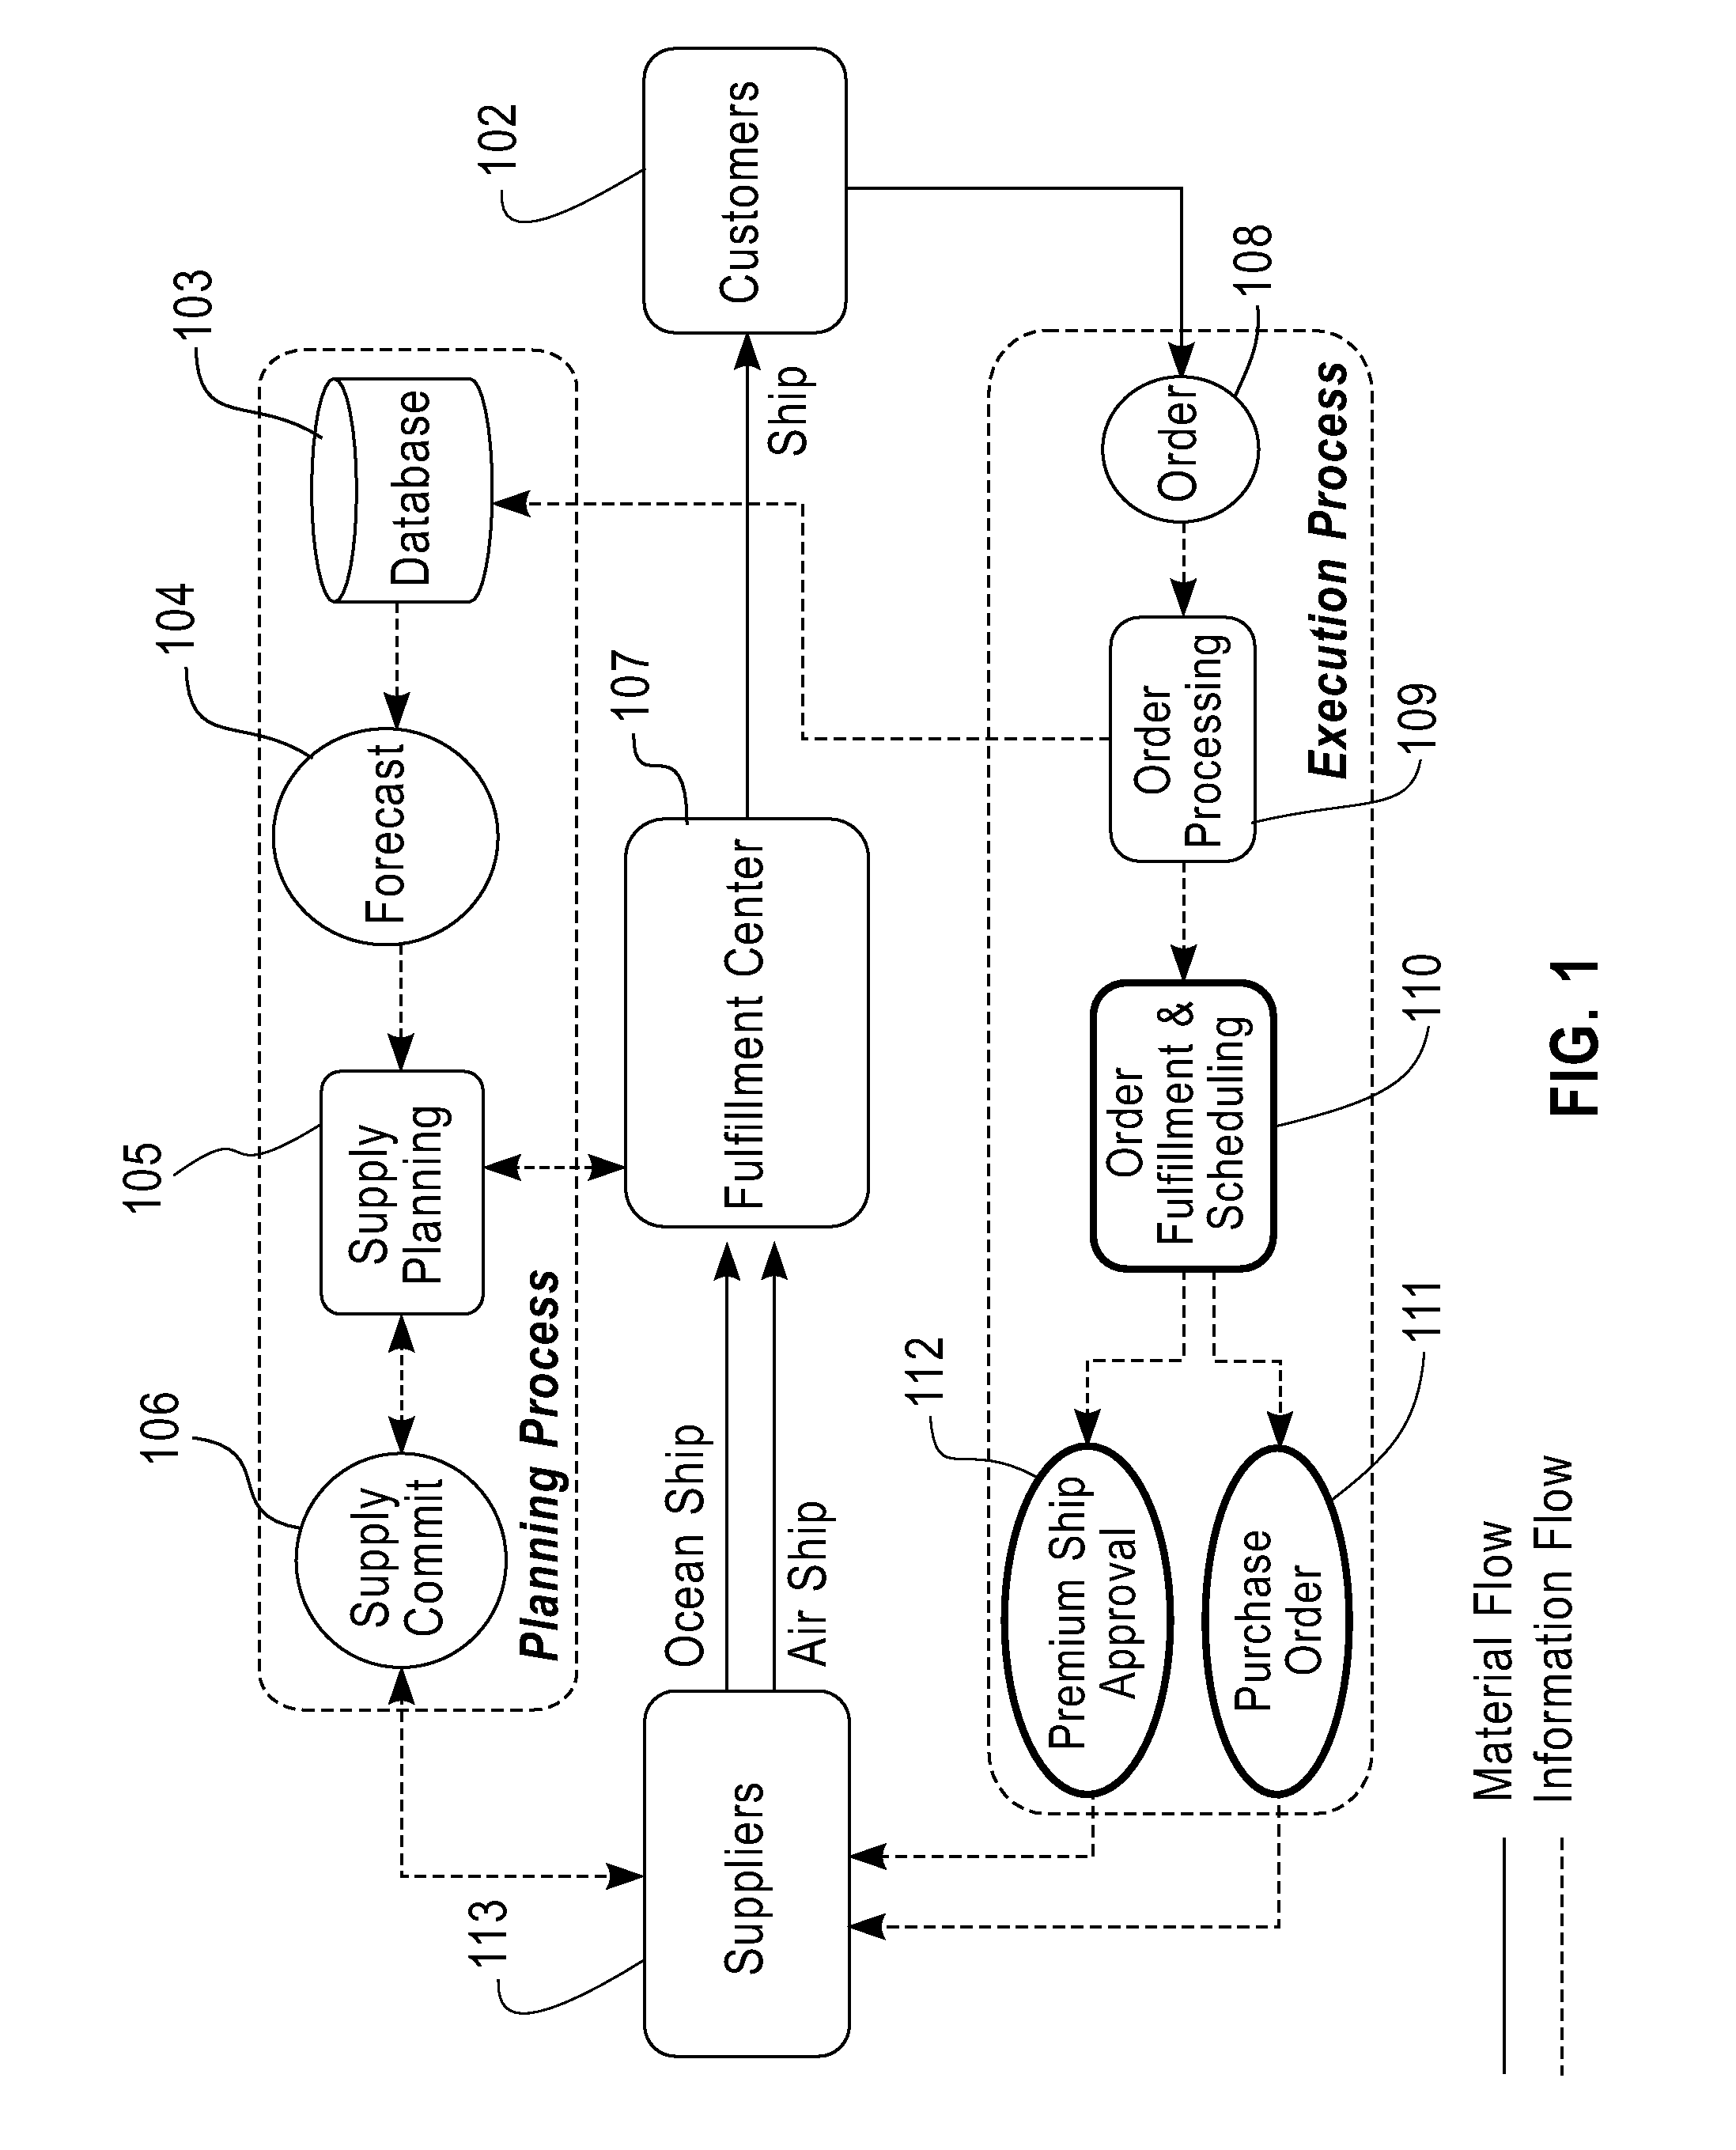 System and method for determining order fulfillment alternative with multiple supply modes